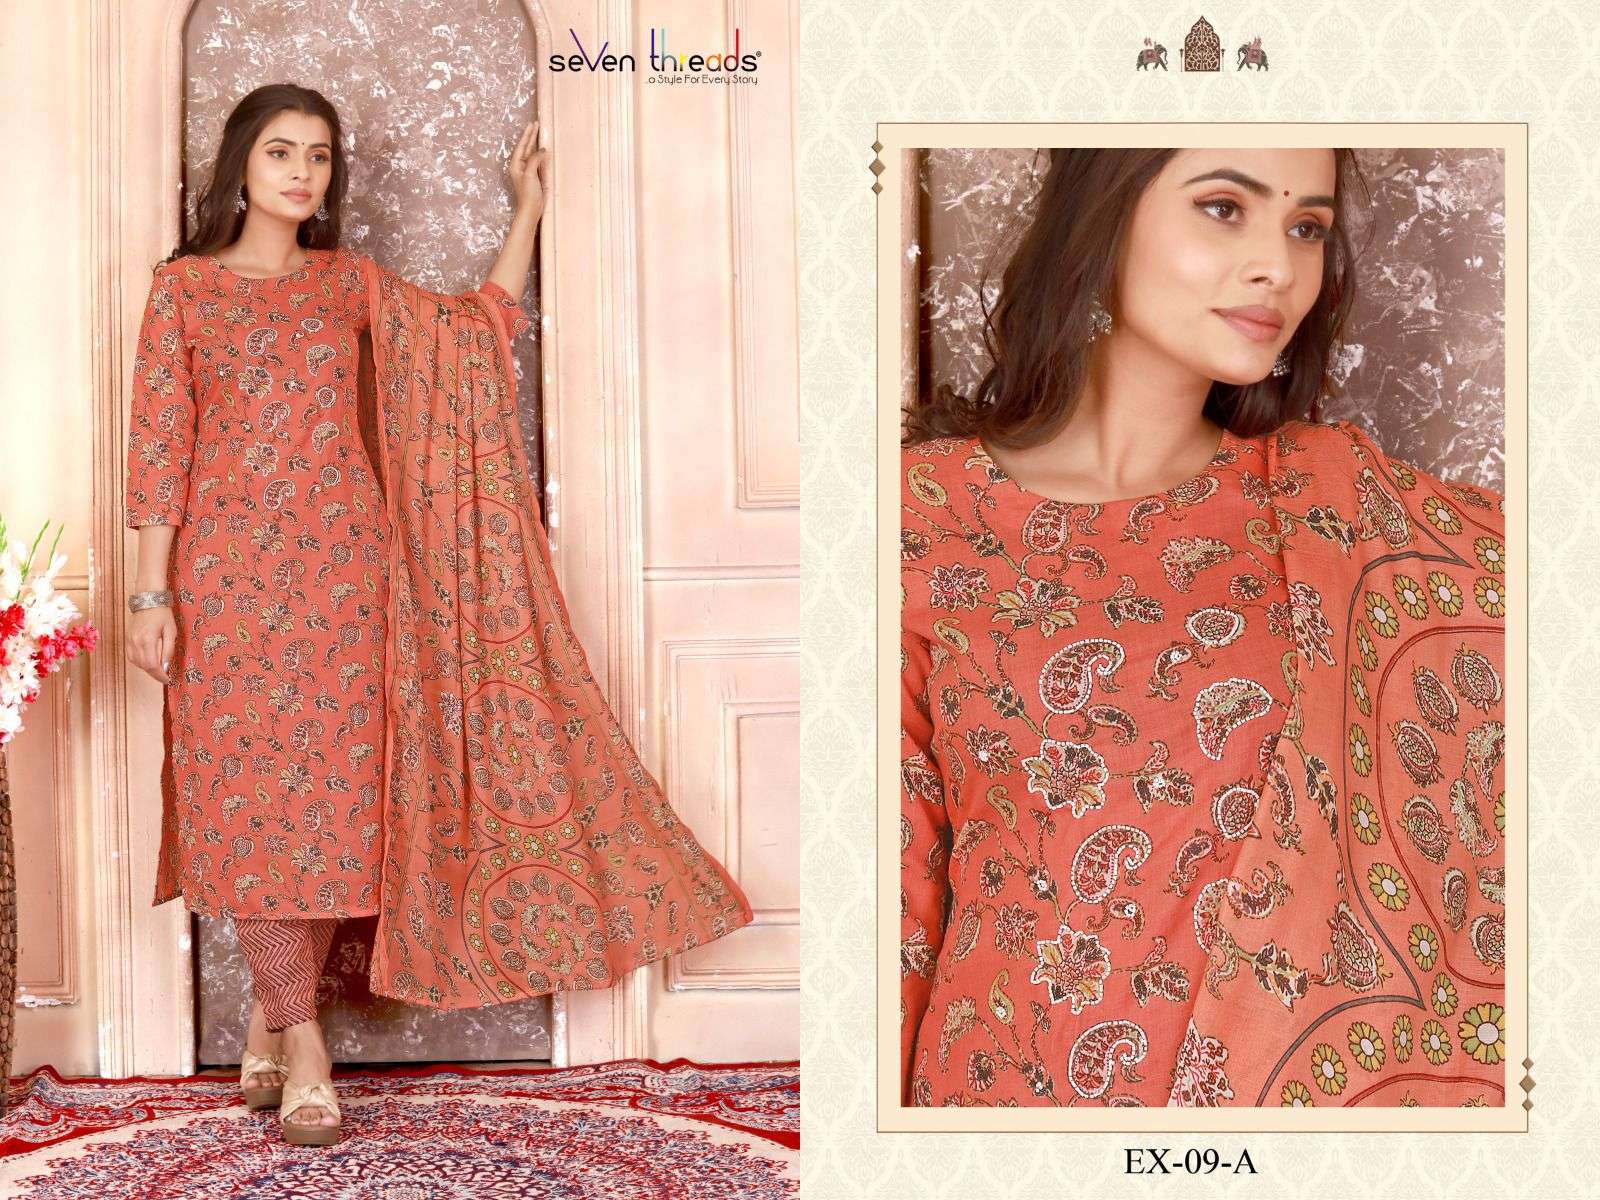 Ex Vol-9 By Seven Threads 09-A To 09-D Series Beautiful Suits Colorful Stylish Fancy Casual Wear & Ethnic Wear Cotton Print Dresses At Wholesale Price